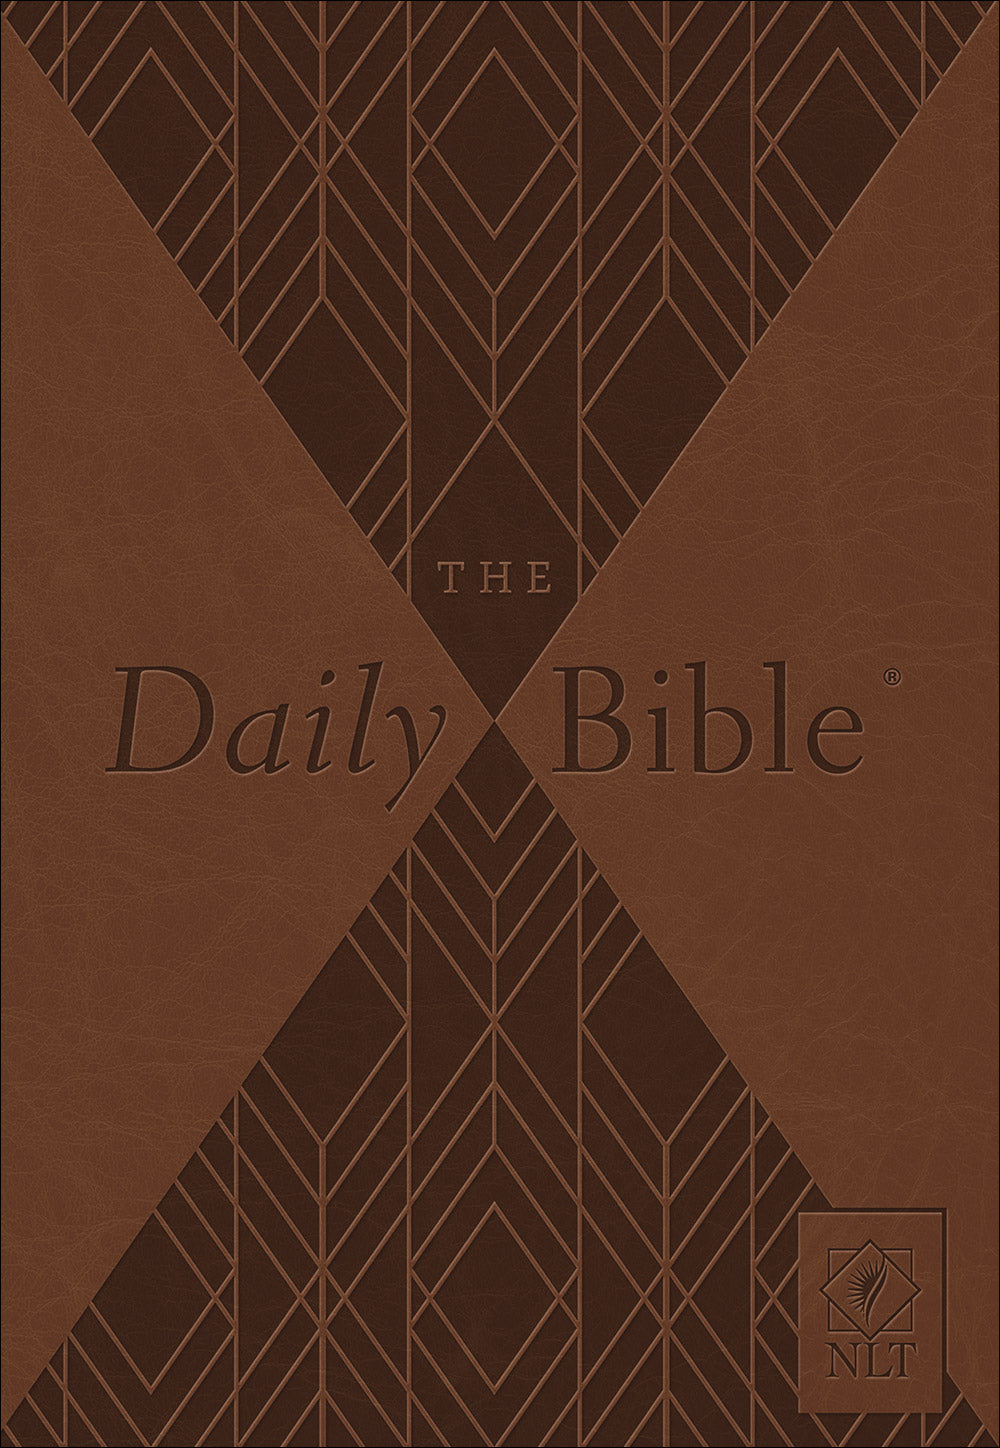 Image of Daily Bible® (NLT) other